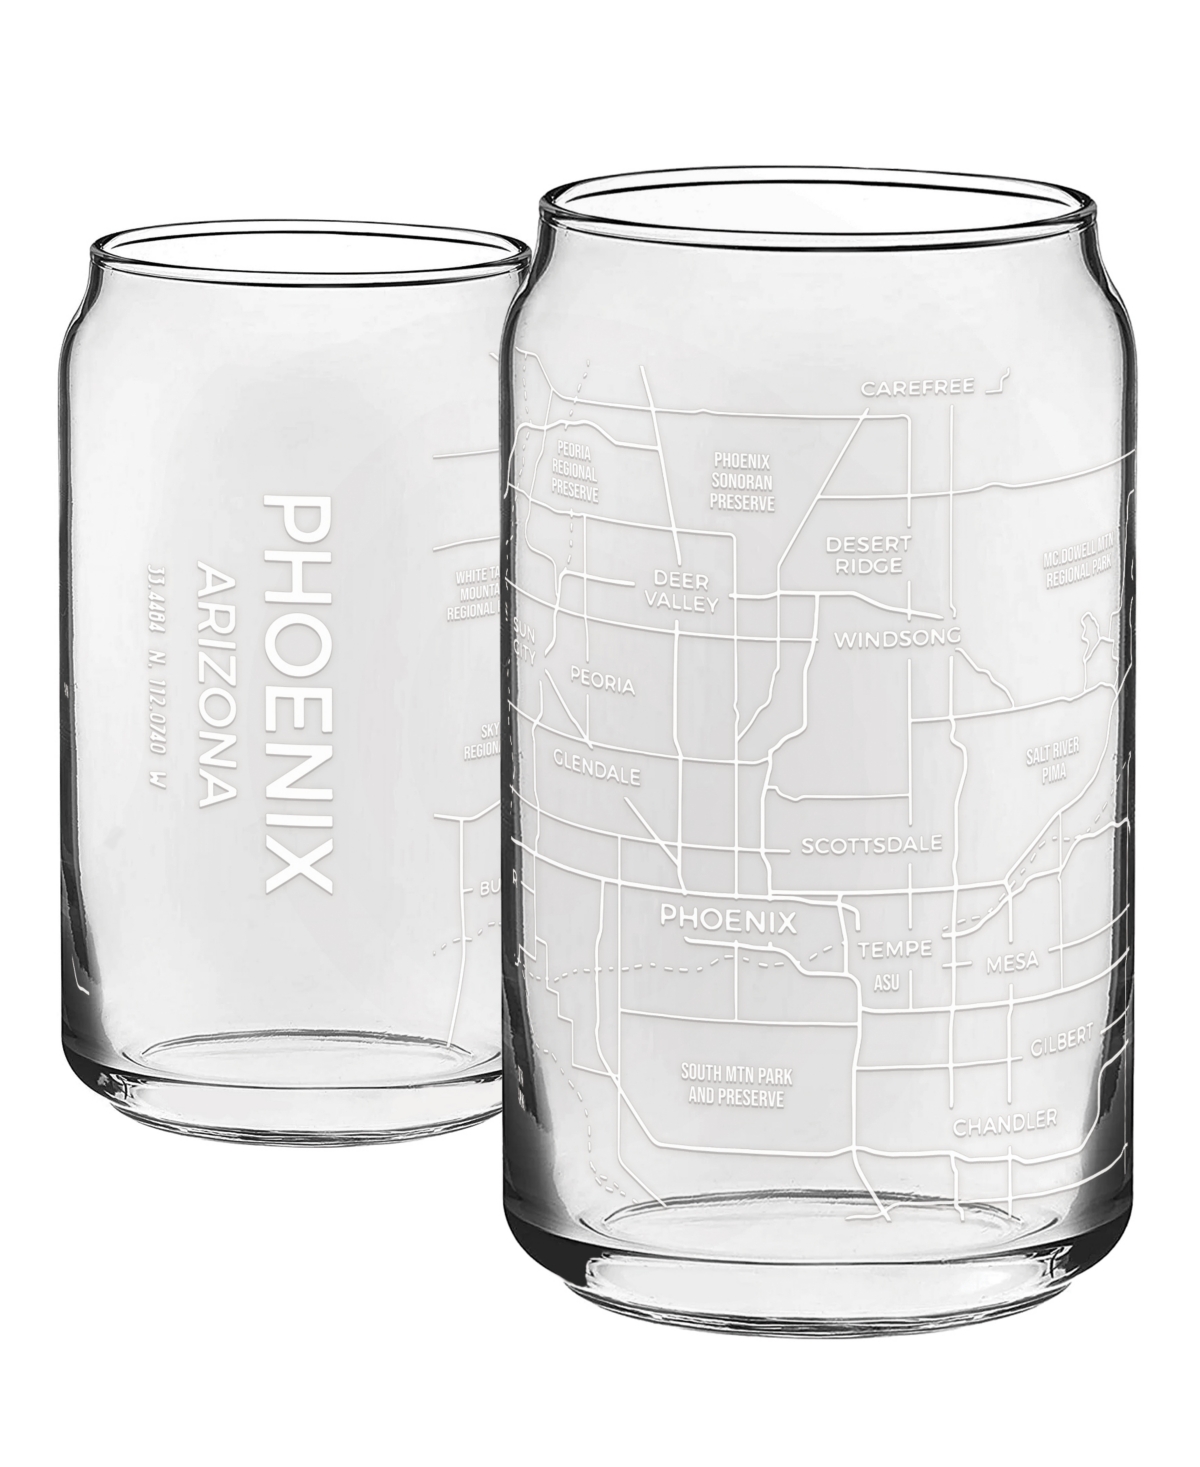 Narbo The Can Phoenix Map 16 oz Everyday Glassware, Set Of 2 In White